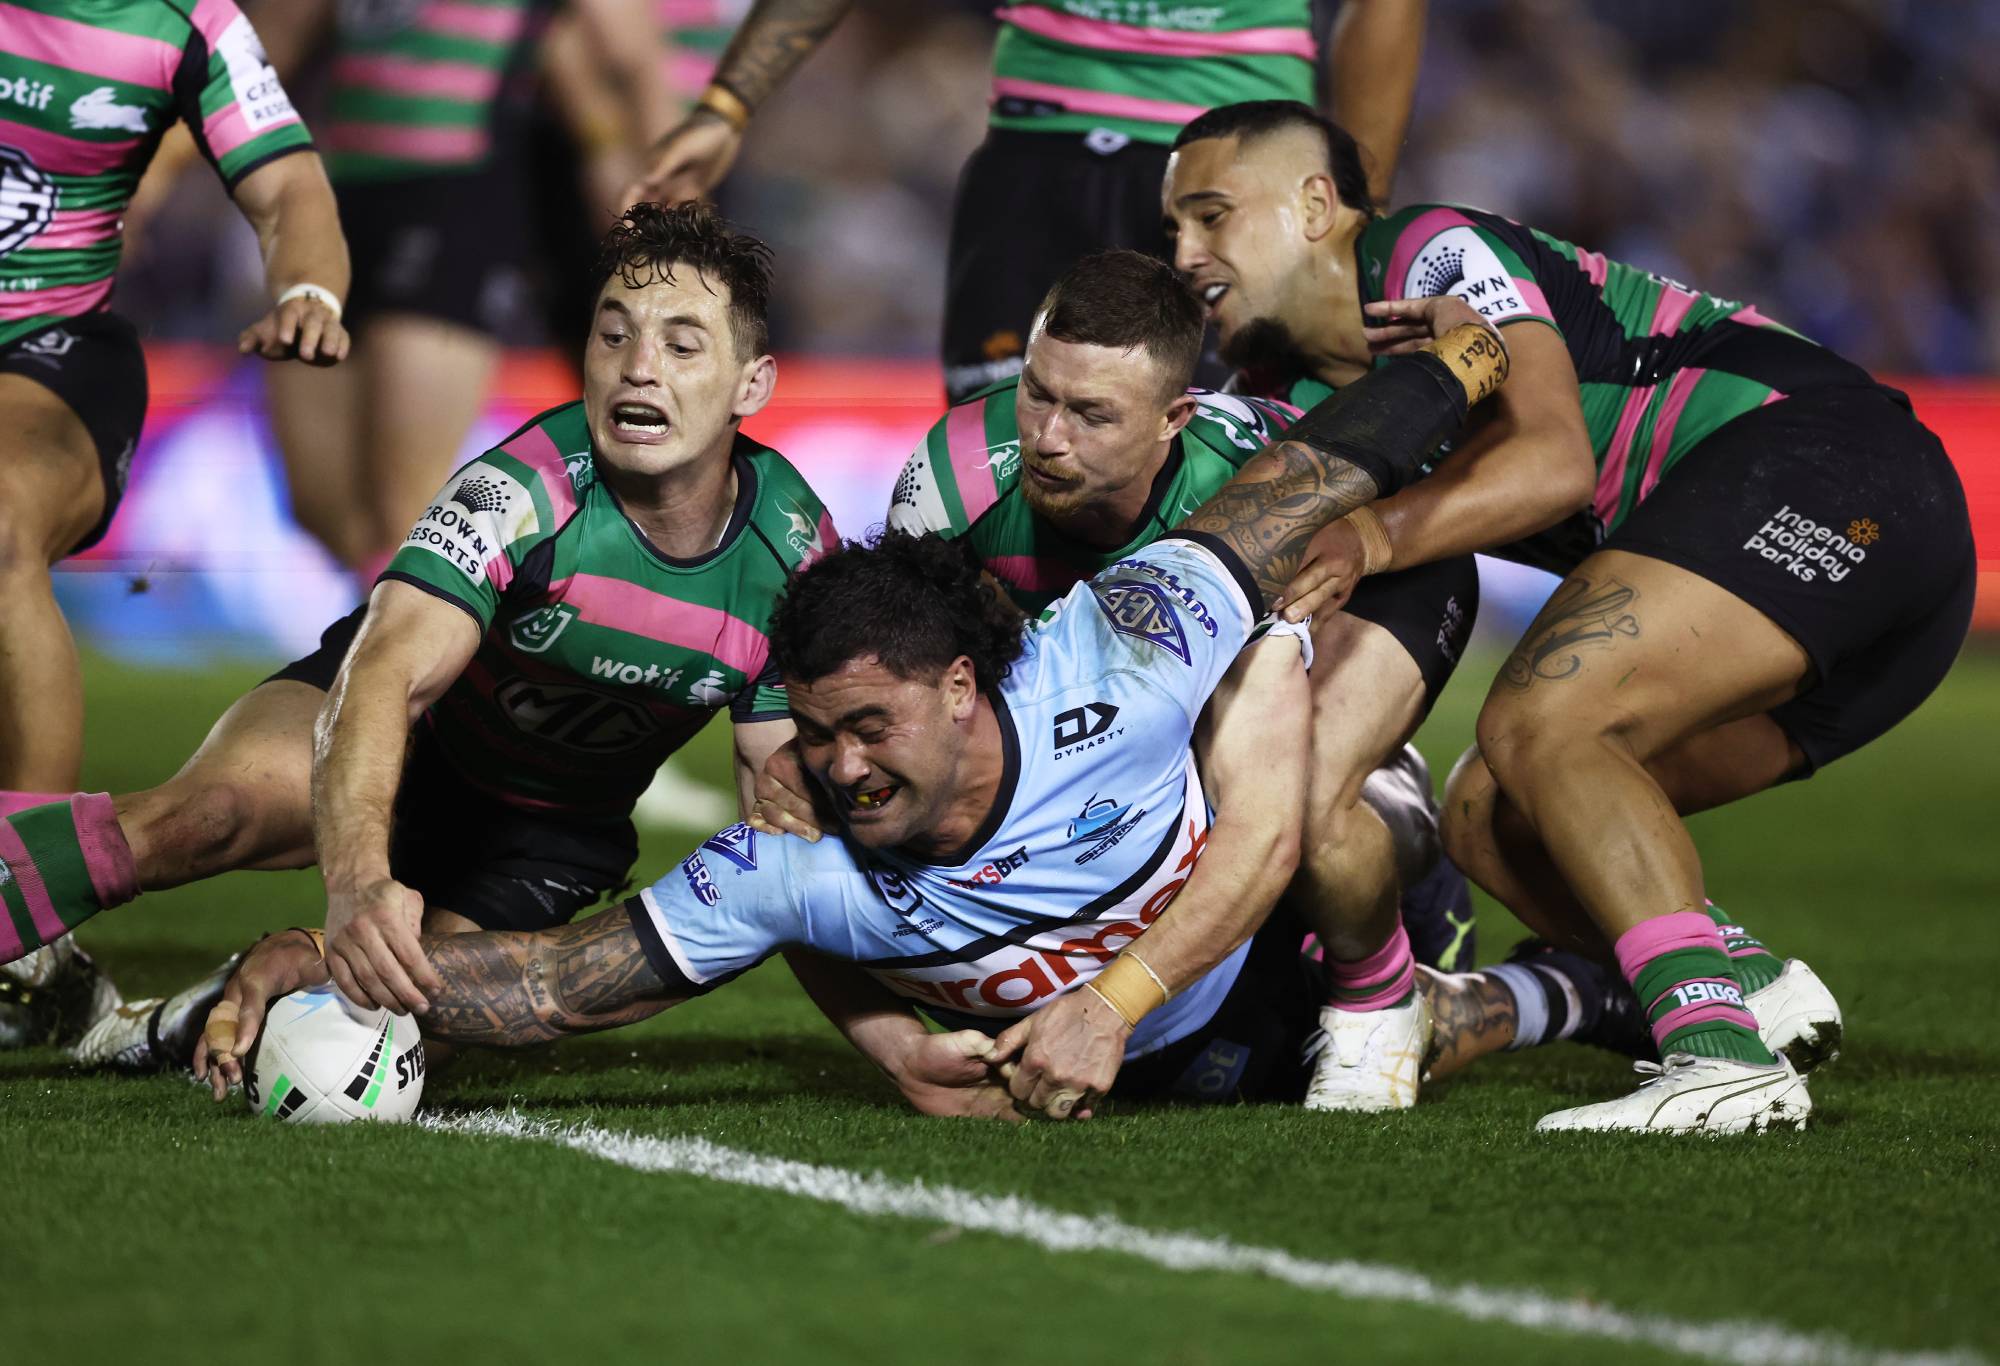 Fifita ends her career as injuries take their toll on Prime Minister winner Shark